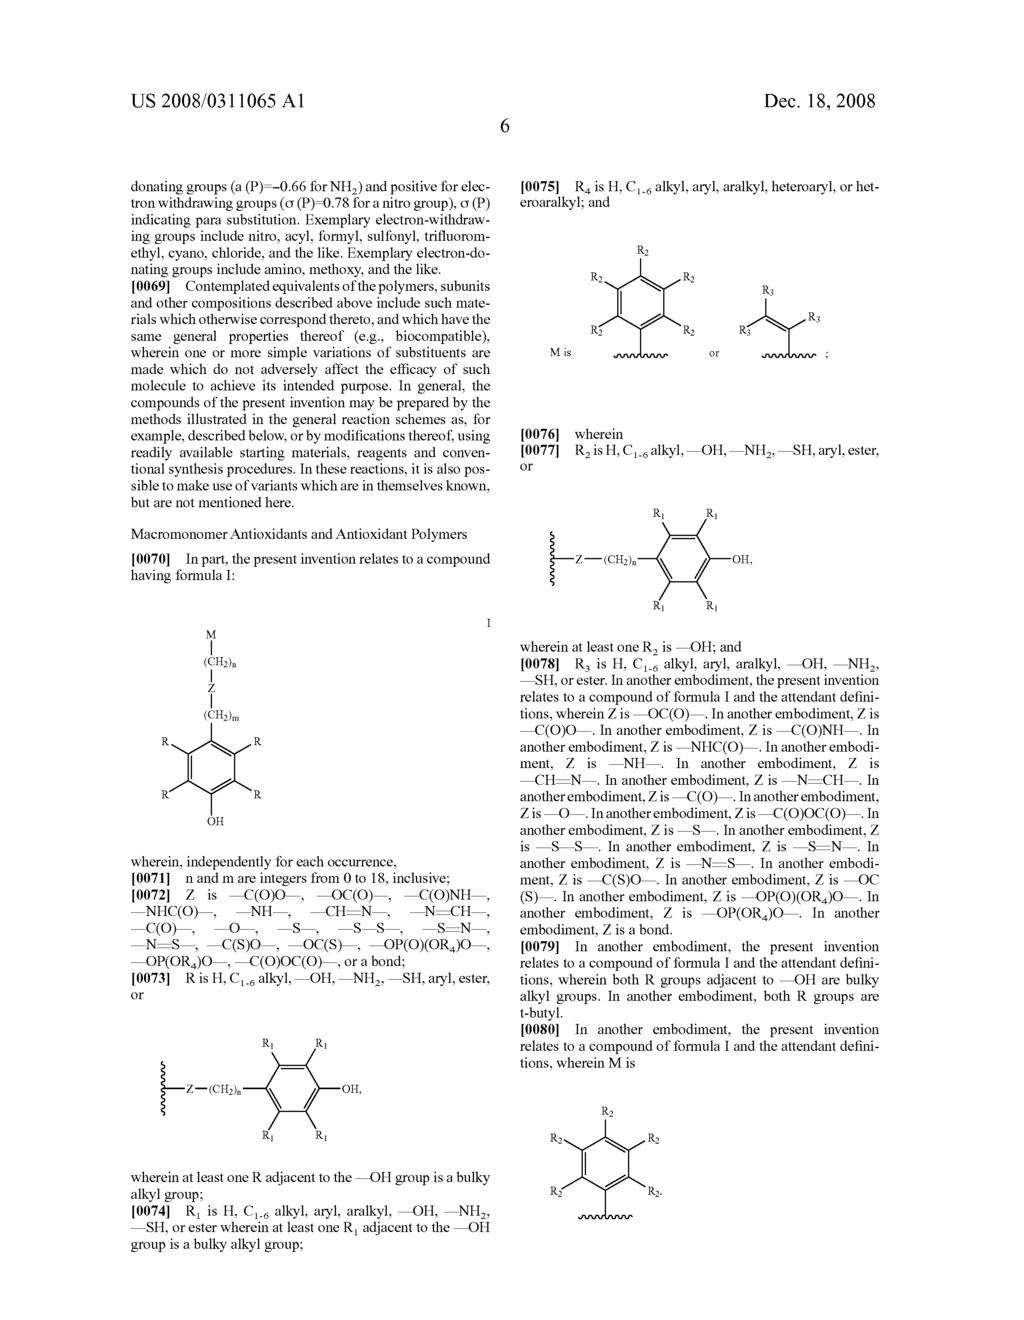 Anti-oxidant macromonomers and polymers and methods of making and using the same - diagram, schematic, and image 15